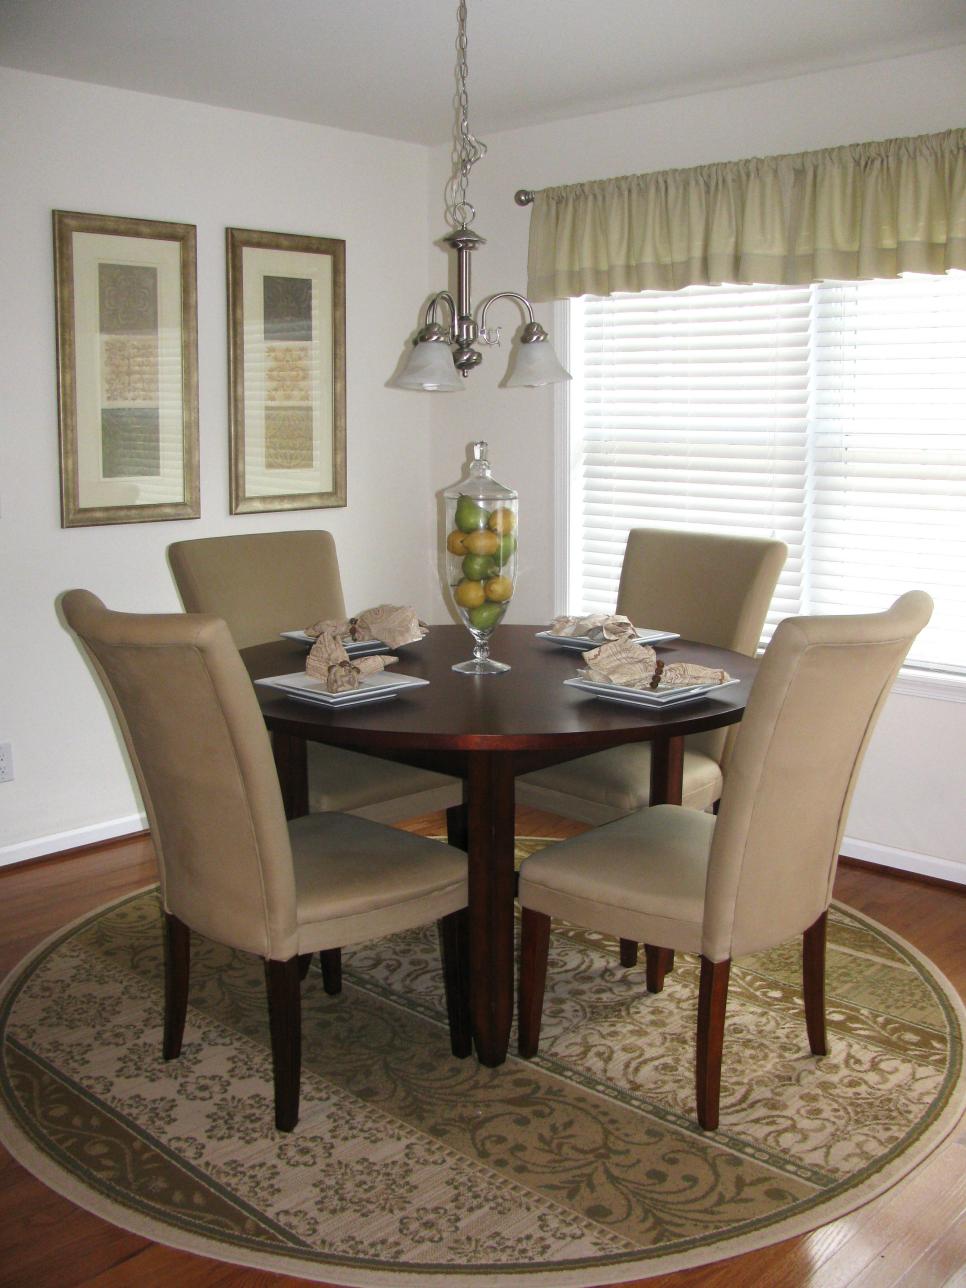 Neutral Transitional Dining Room With Round Table and Area Rug | HGTV